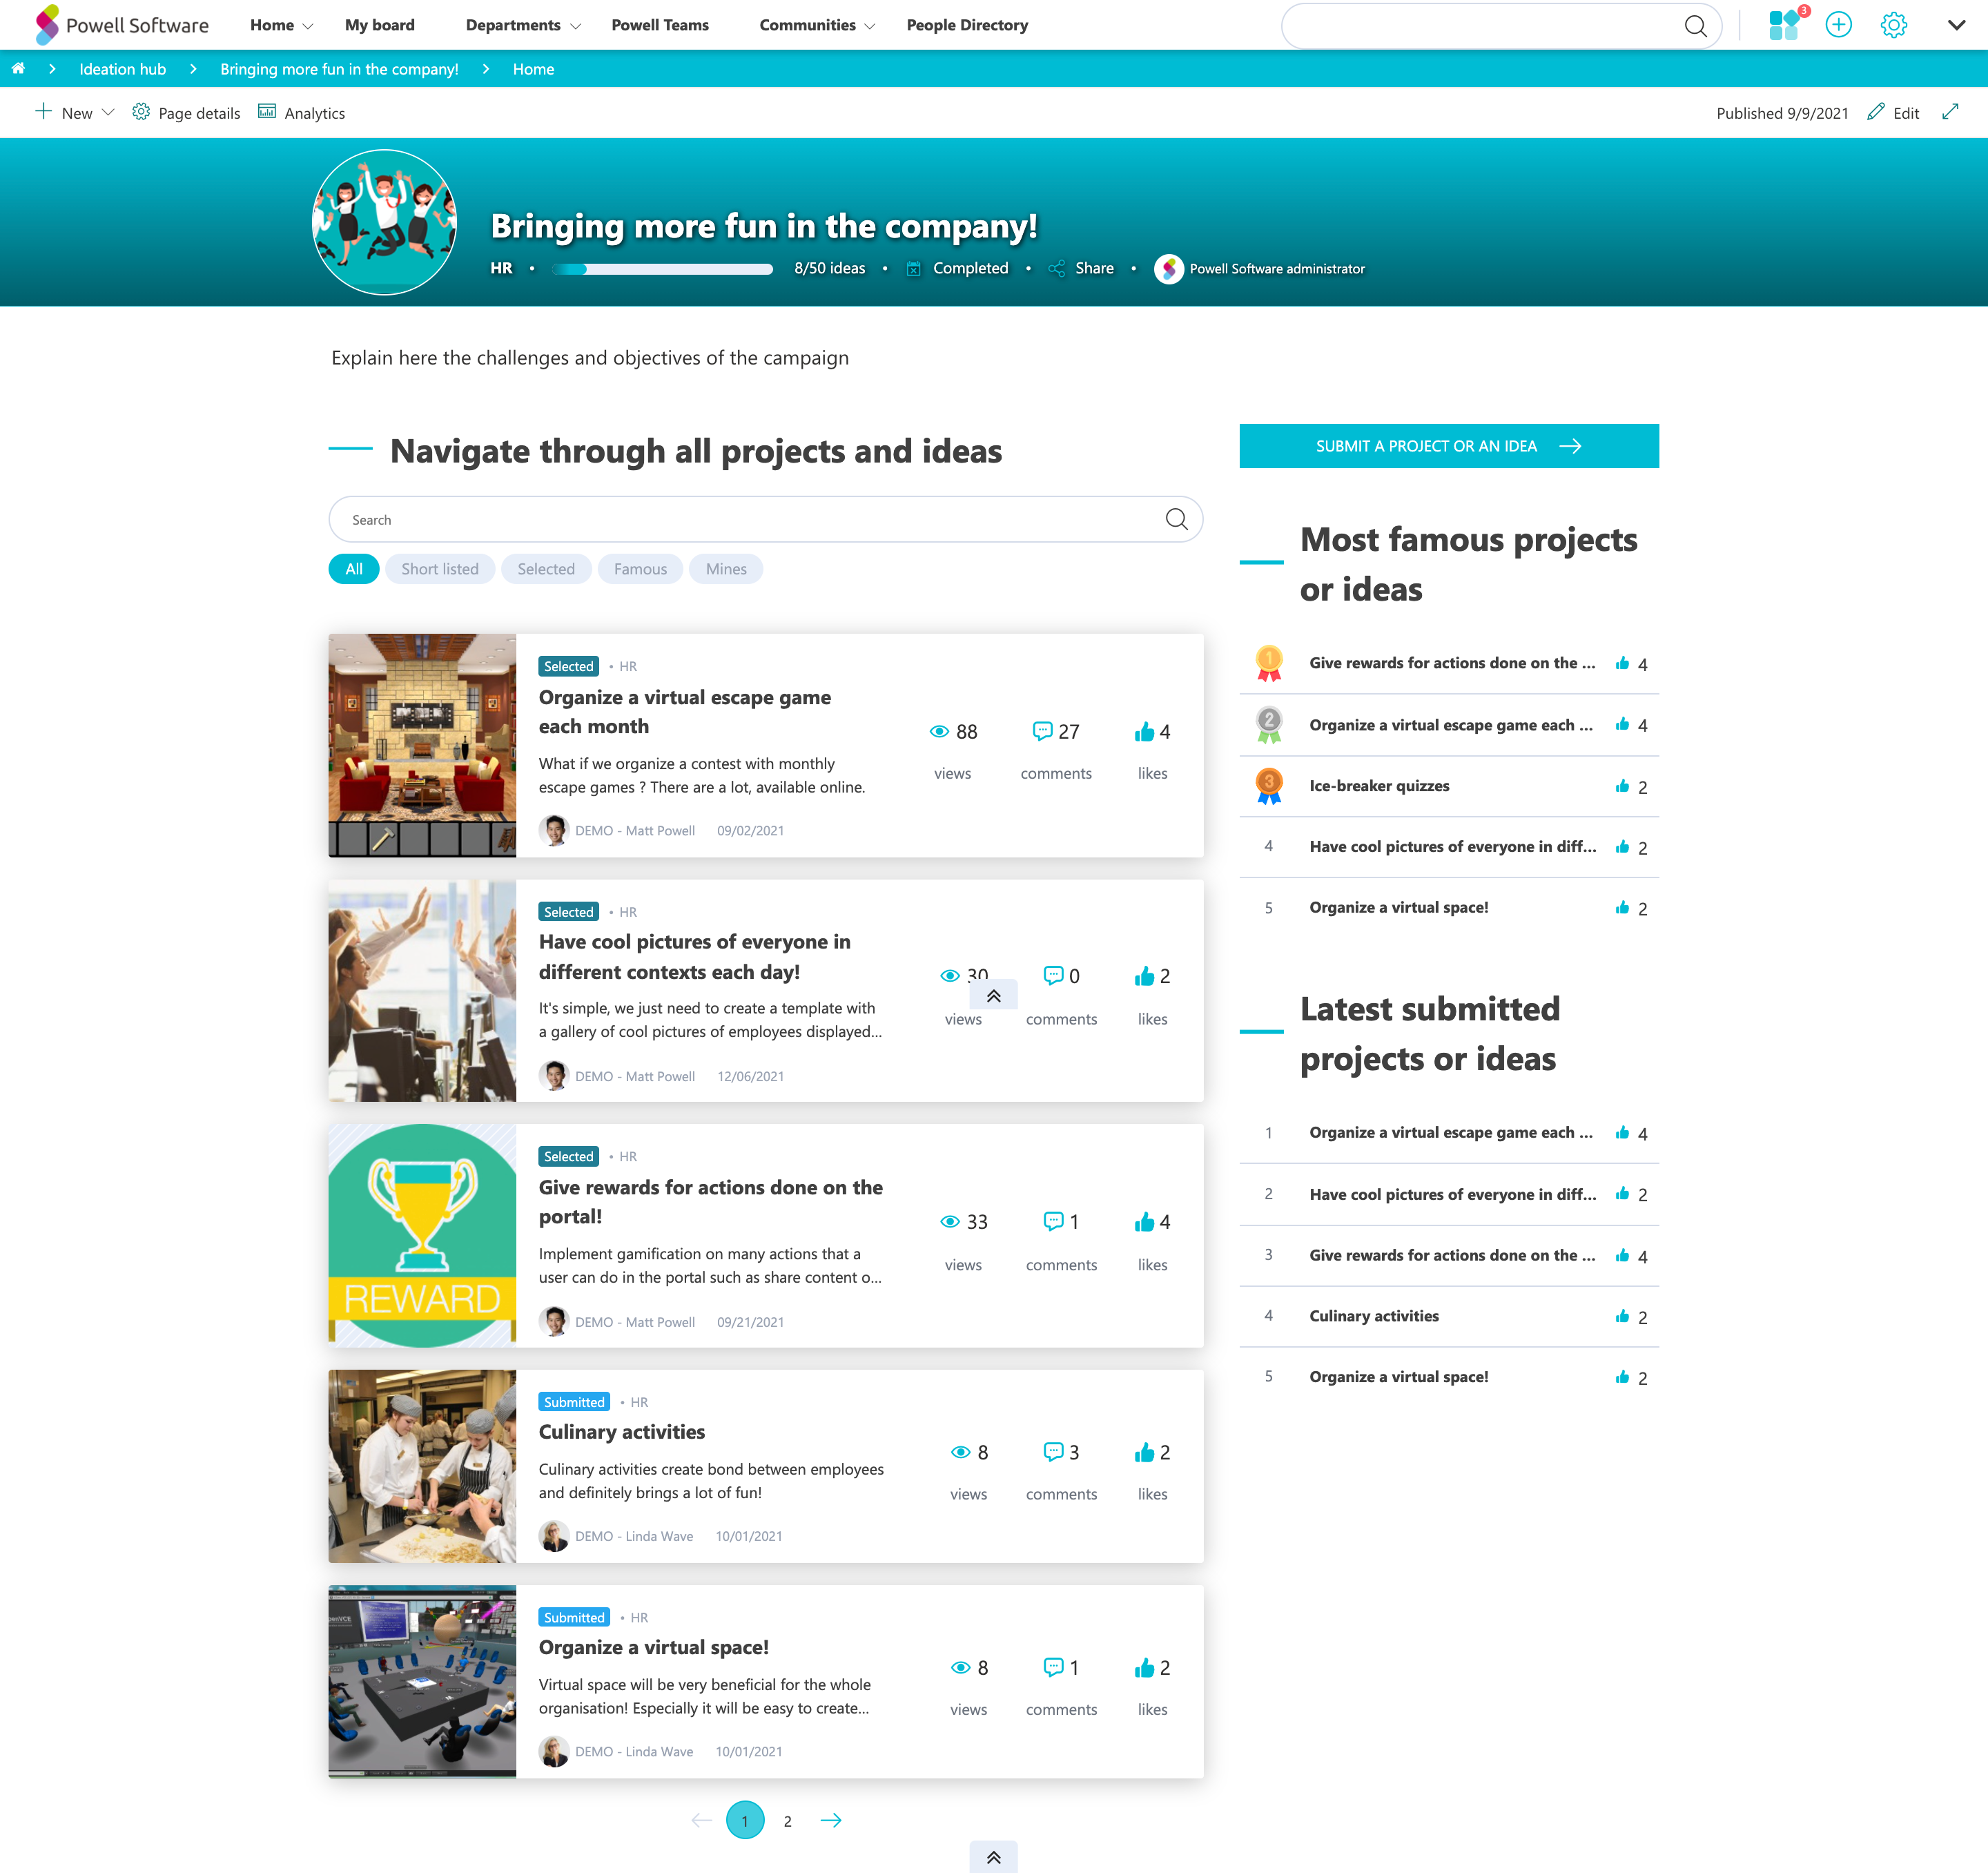 screencapture-pow365-sharepoint-sites-ideation-hub-Bringing-more-fun-in-the-company-2022-01-31-12_42_53.png